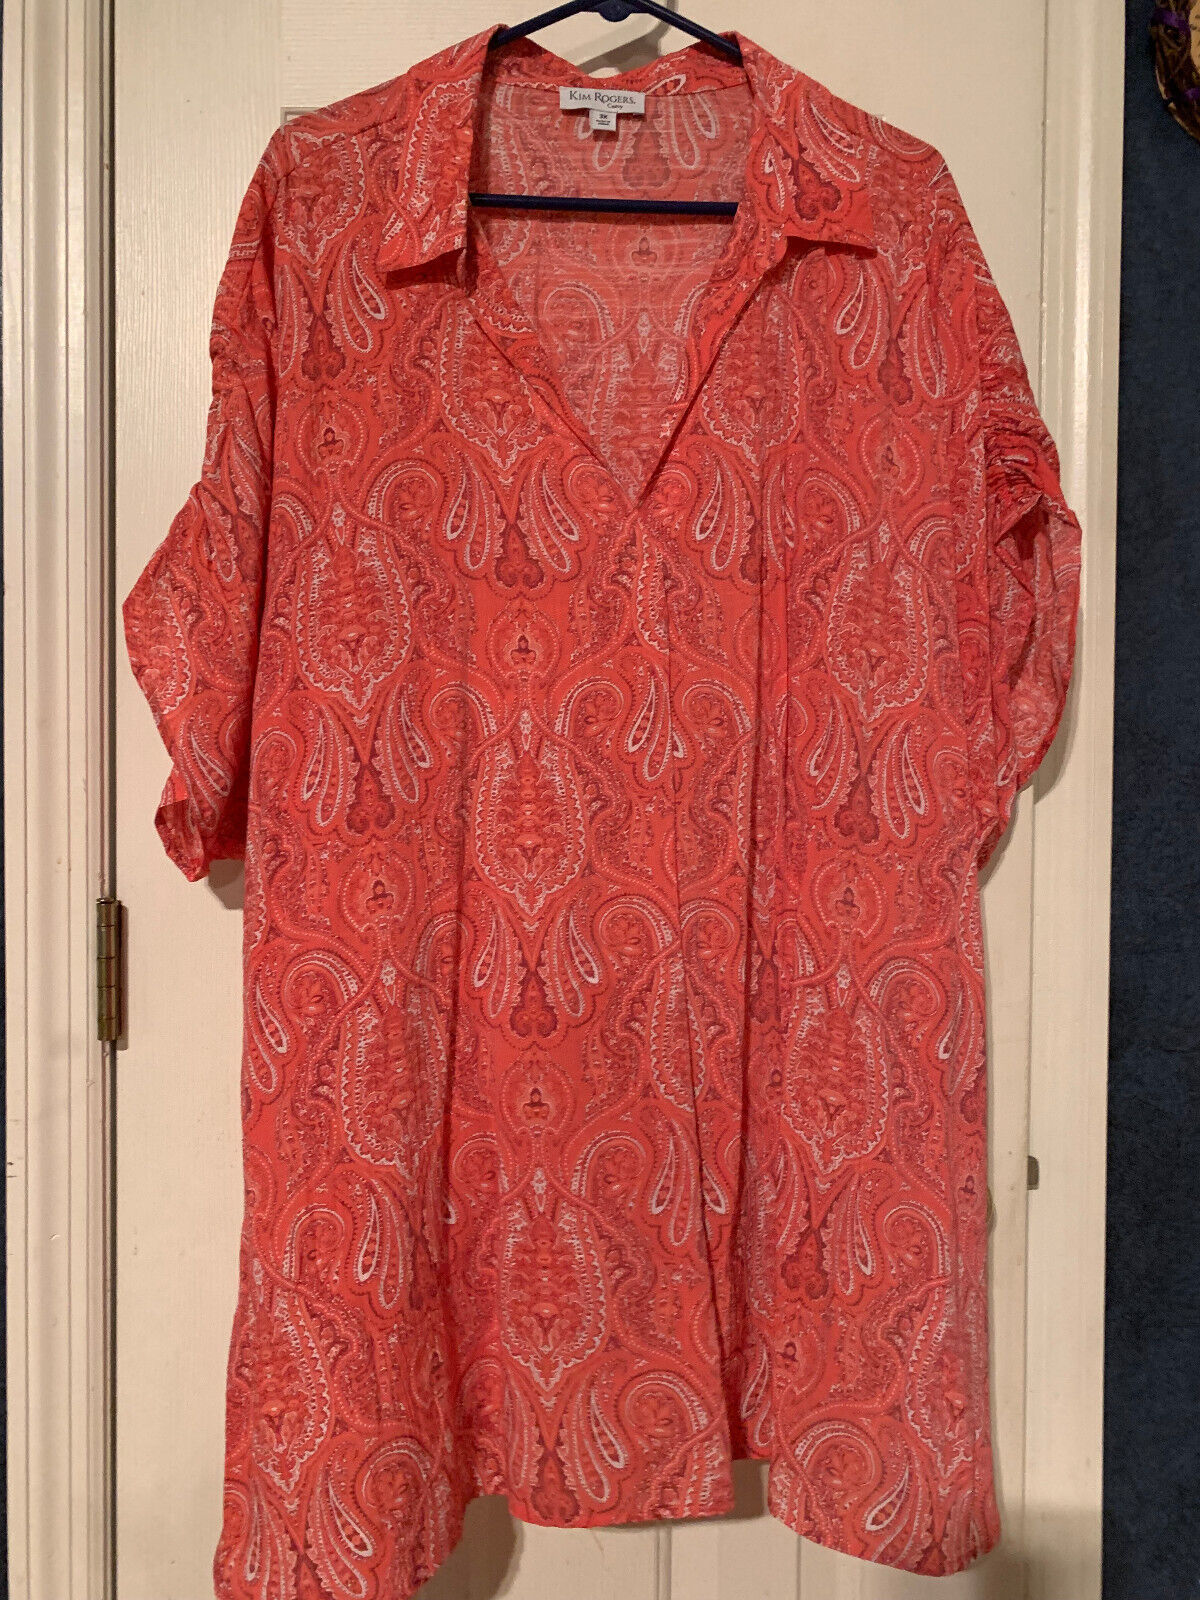 Primary image for NWT - Kim Rogers Curvy Size 3X Coral Paisley Print Short Sleeve V-Neck Blouse